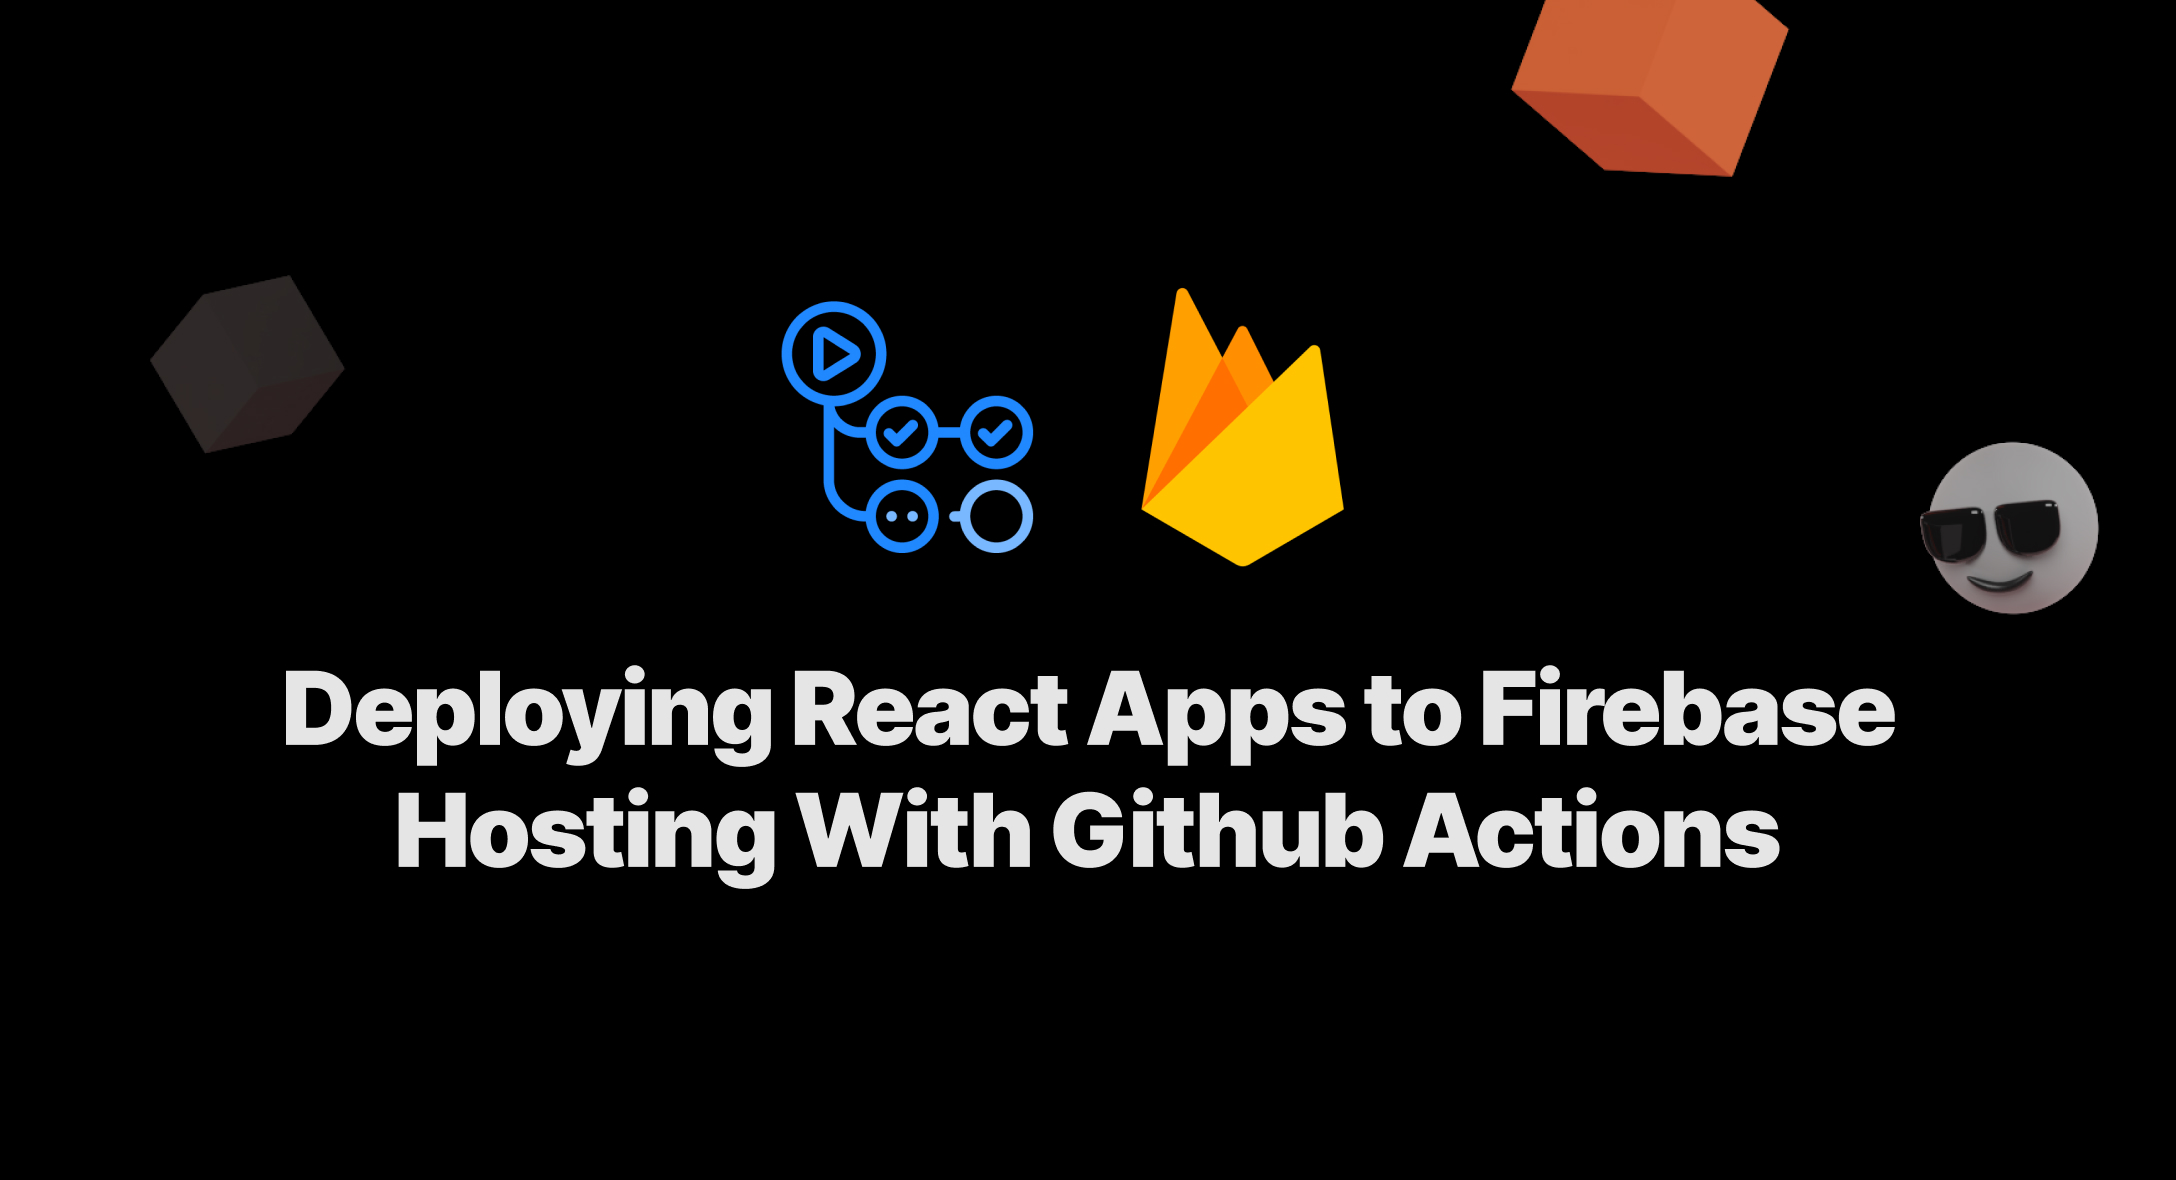 Deploying React Apps to Firebase Hosting With Github Actions